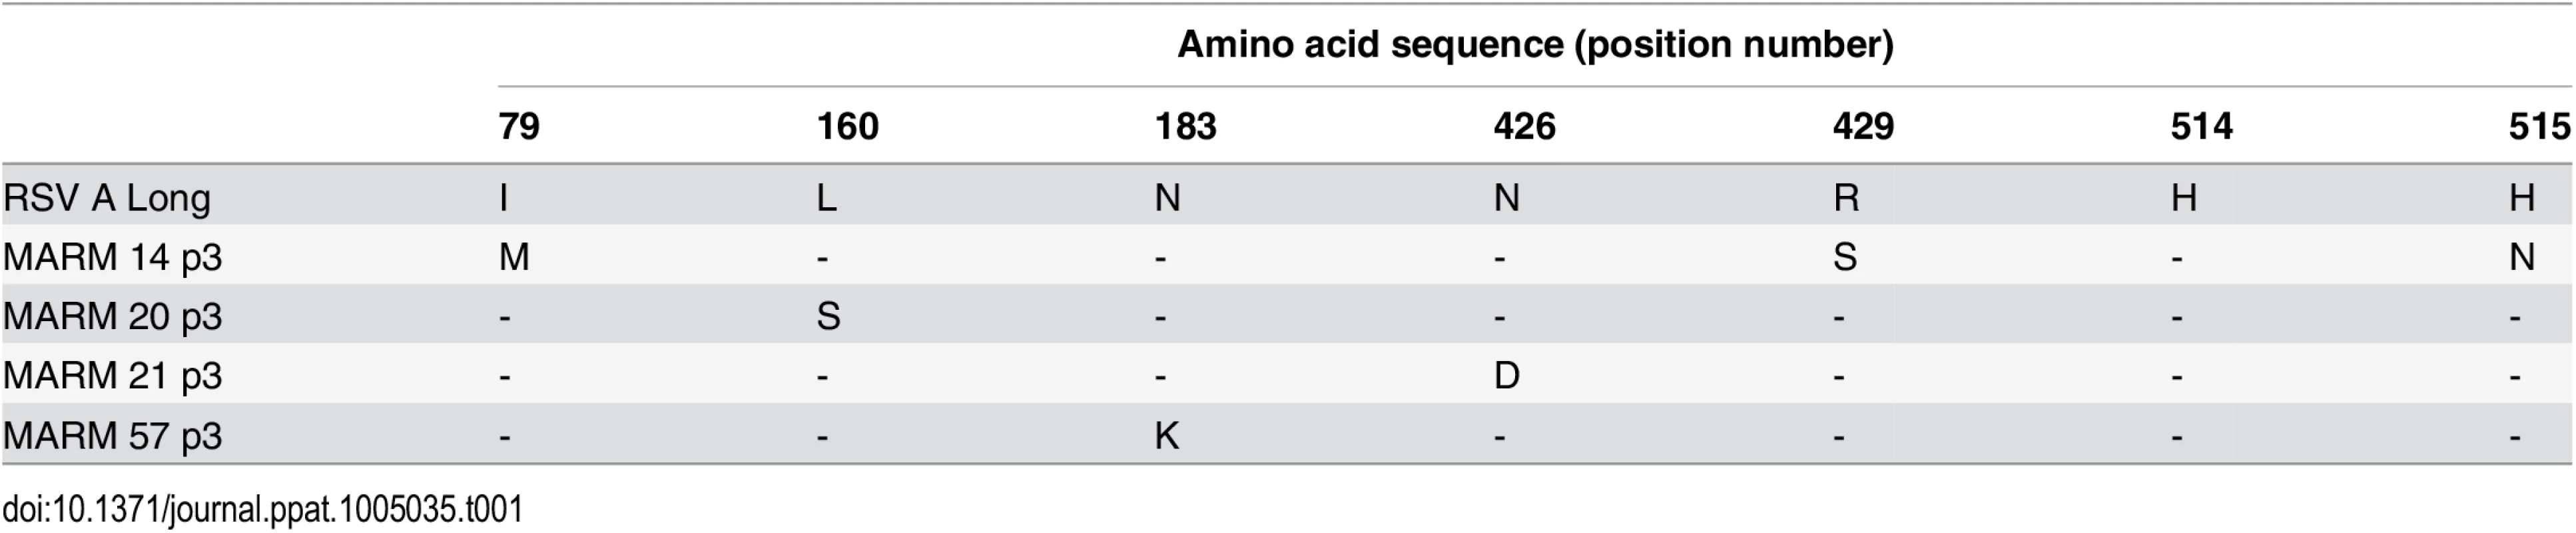 Amino acid changes in F protein of AM14 MARMs.